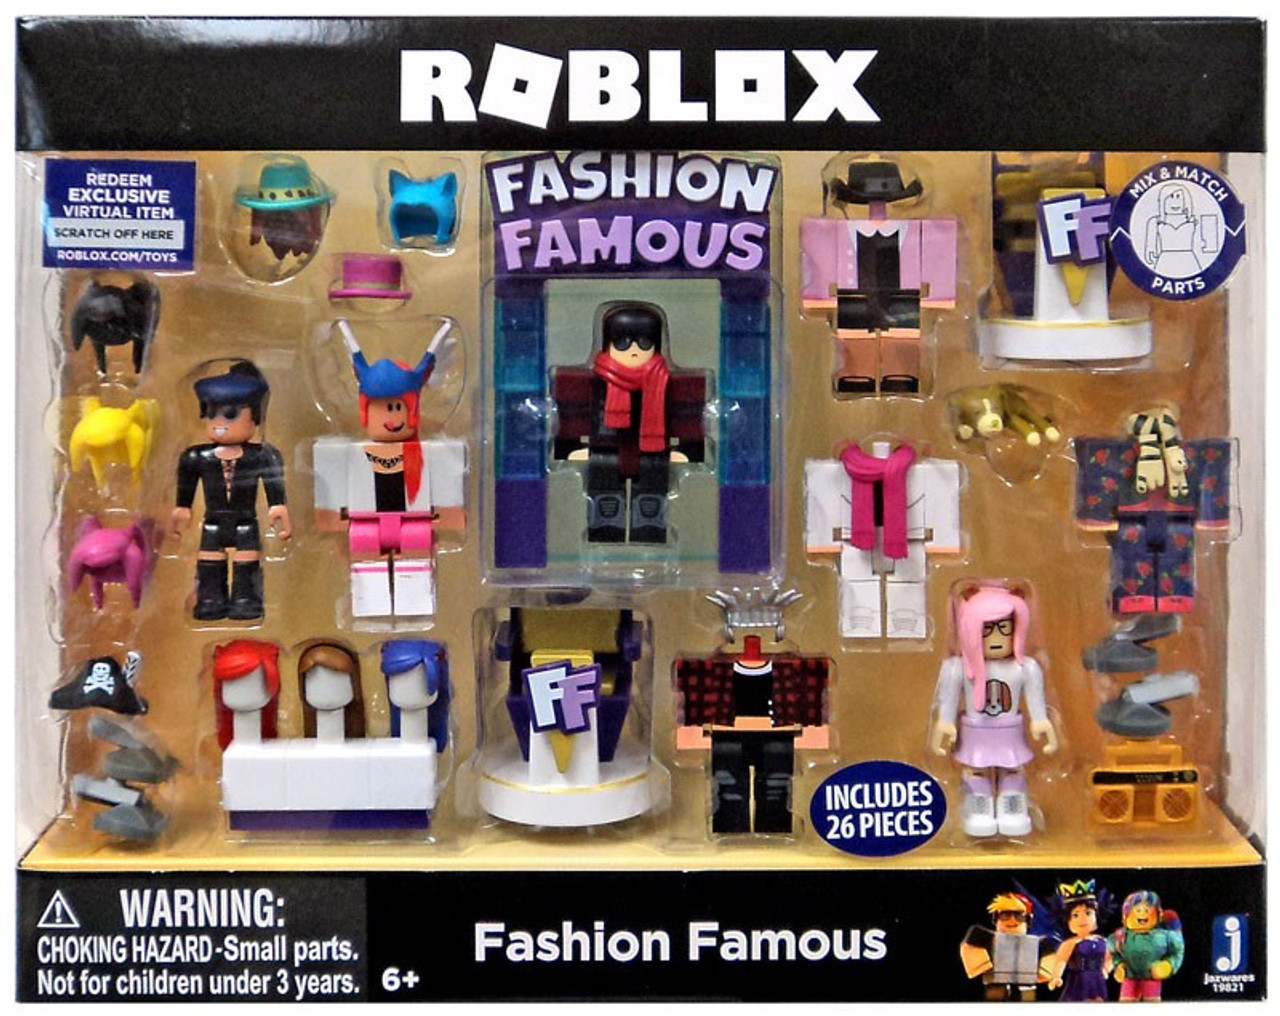 Roblox Fashion Famous Toy Roblox Game Error Code 103